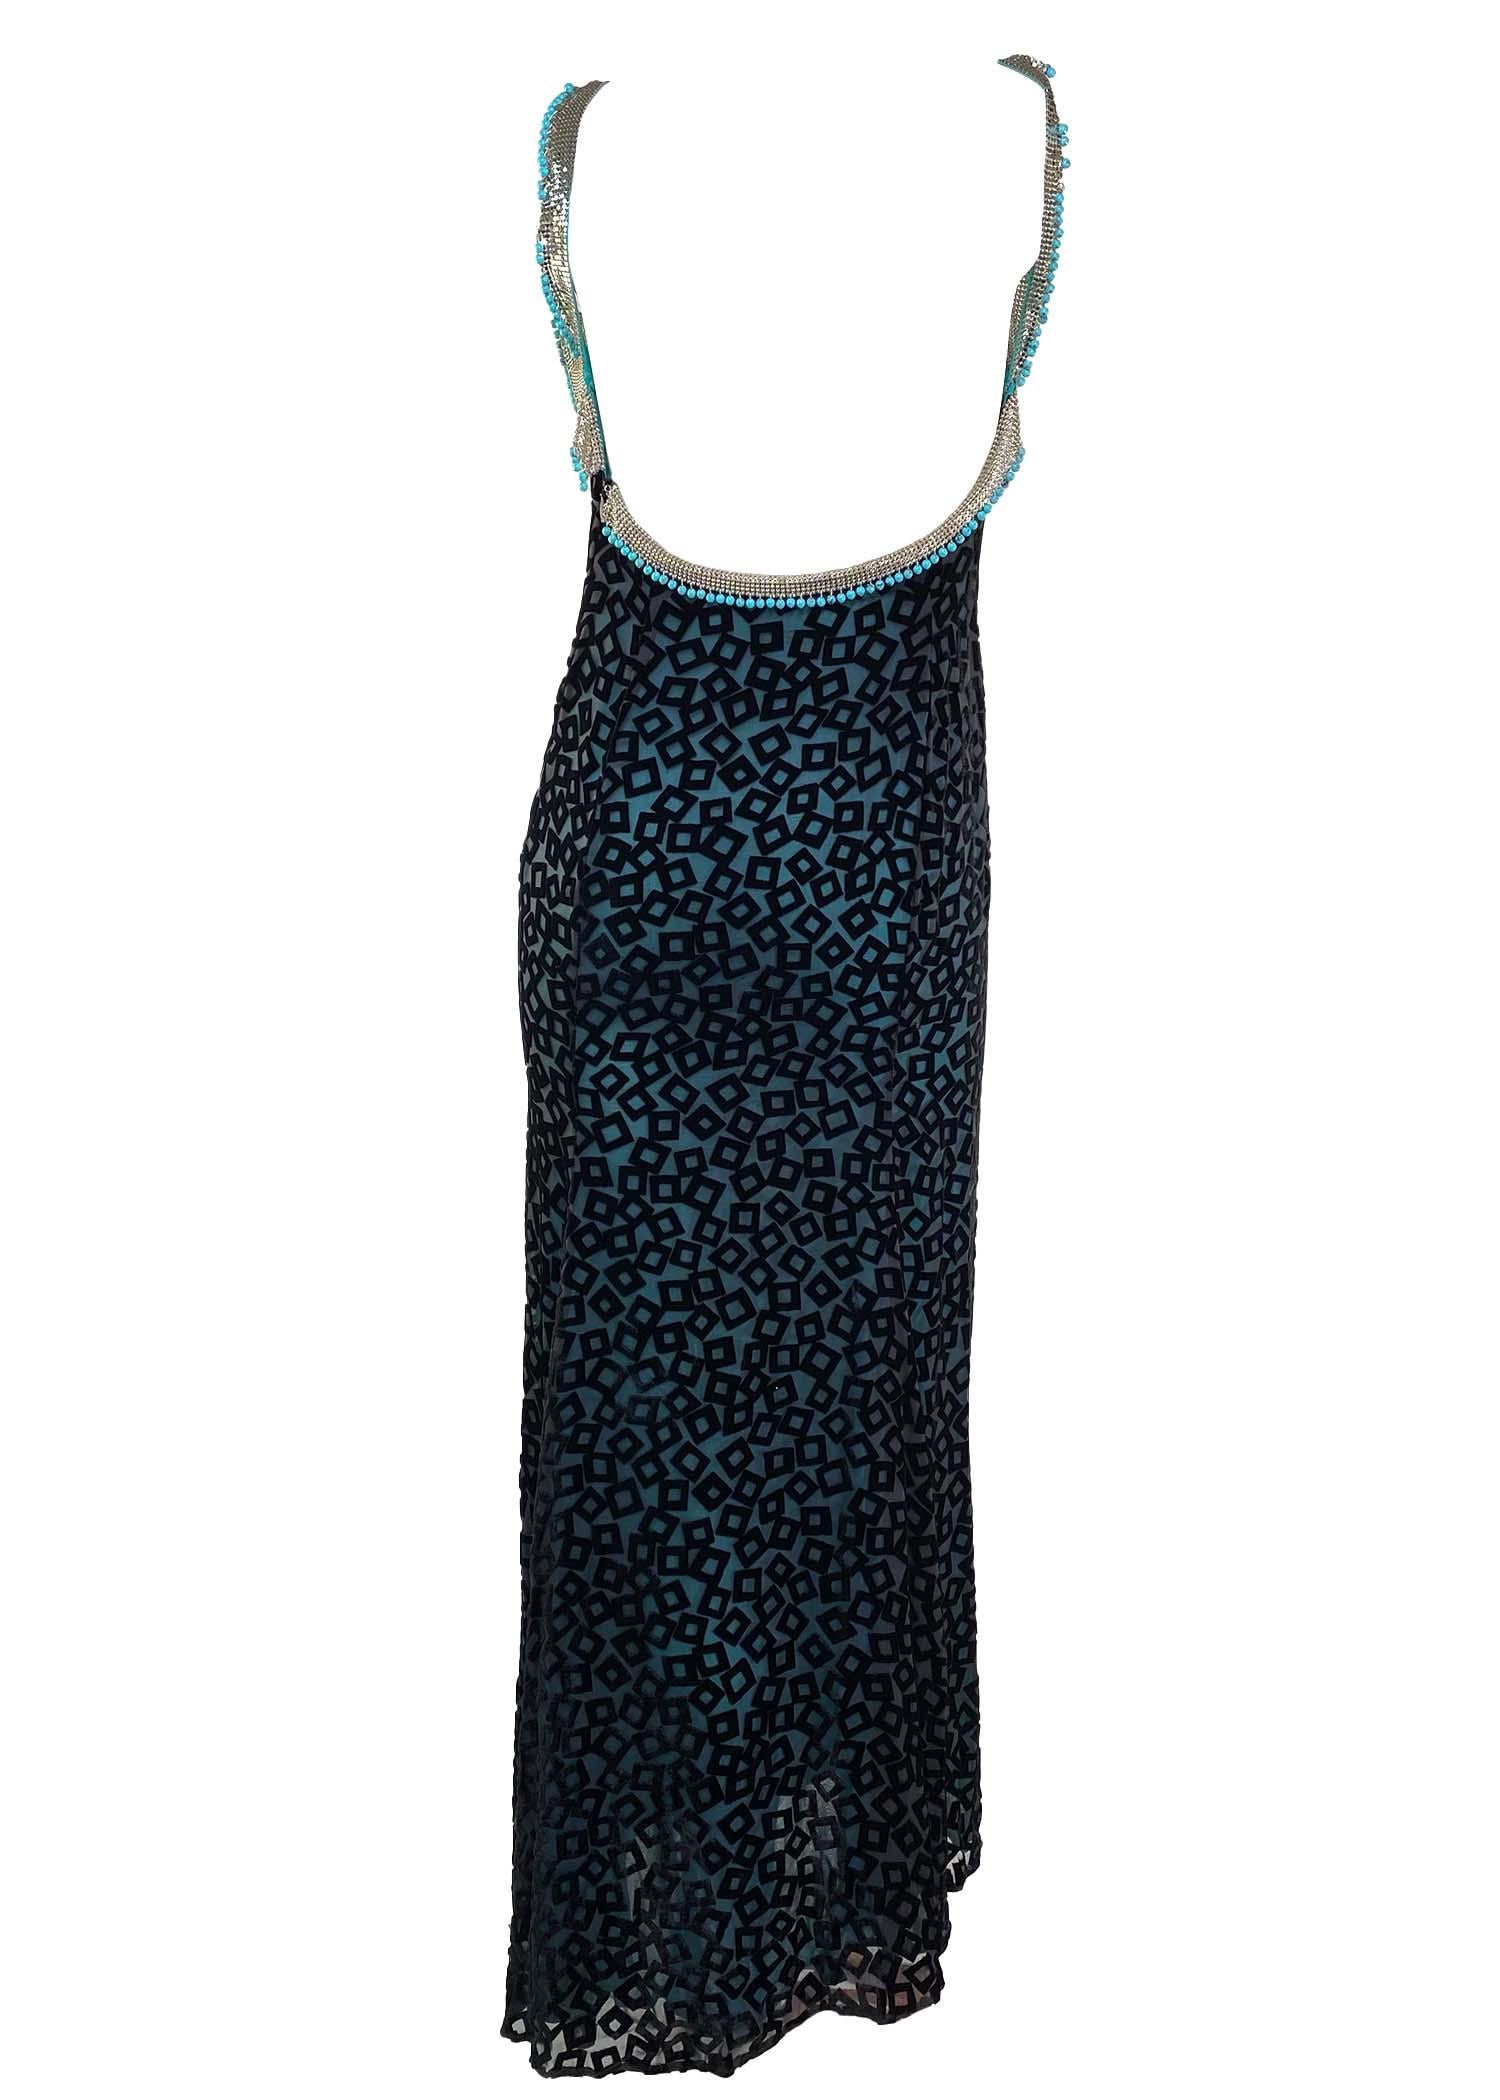 F/W 1999 Gianni Versace by Donatella Black Velvet Turquoise Beaded Oroton Gown In Good Condition For Sale In West Hollywood, CA